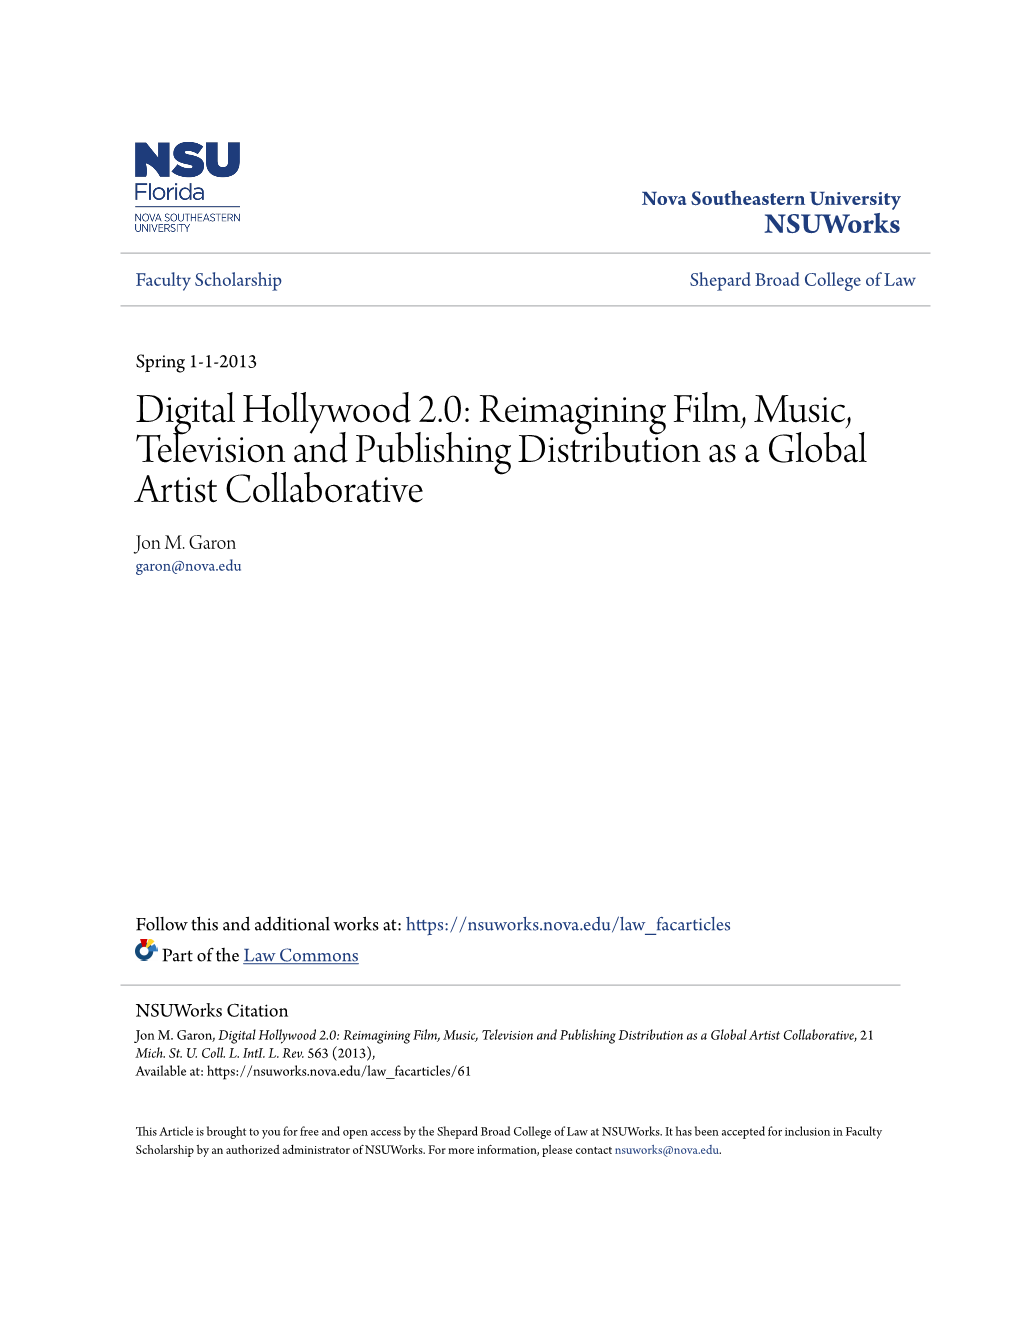 Digital Hollywood 2.0: Reimagining Film, Music, Television and Publishing Distribution As a Global Artist Collaborative Jon M